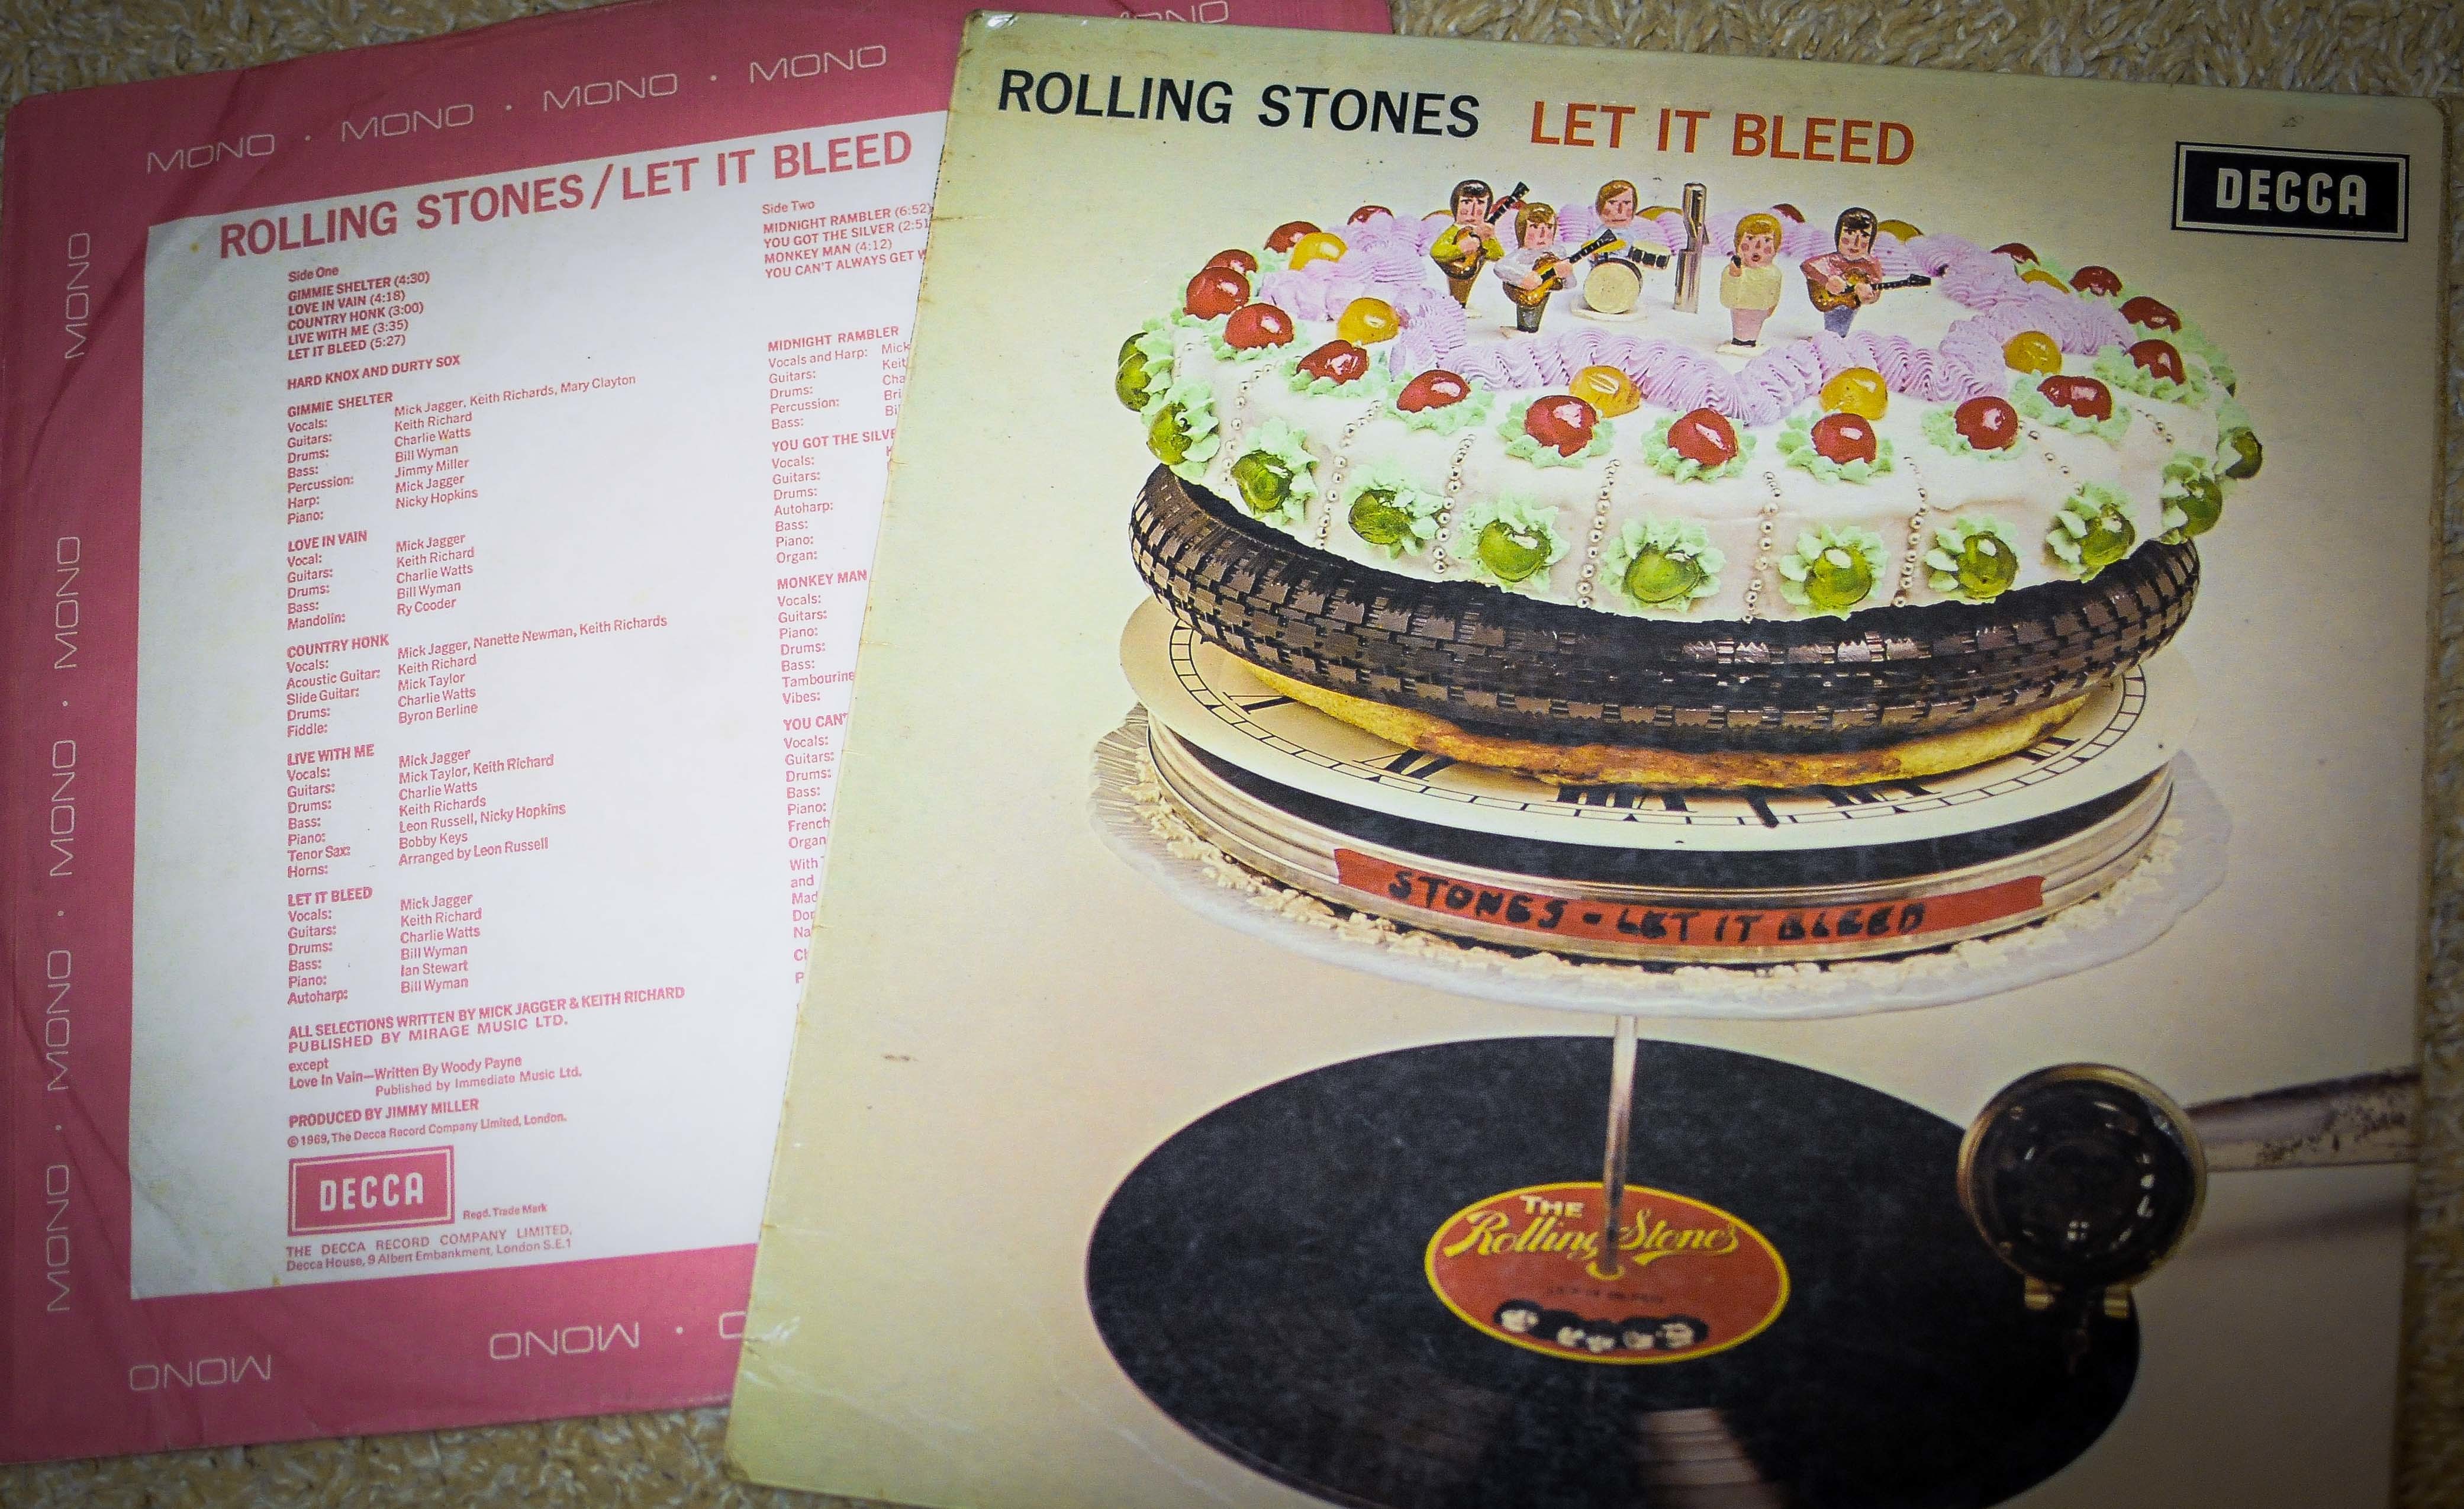 The Rolling Stones - Let It Bleed UK MONO - The Rolling Stones